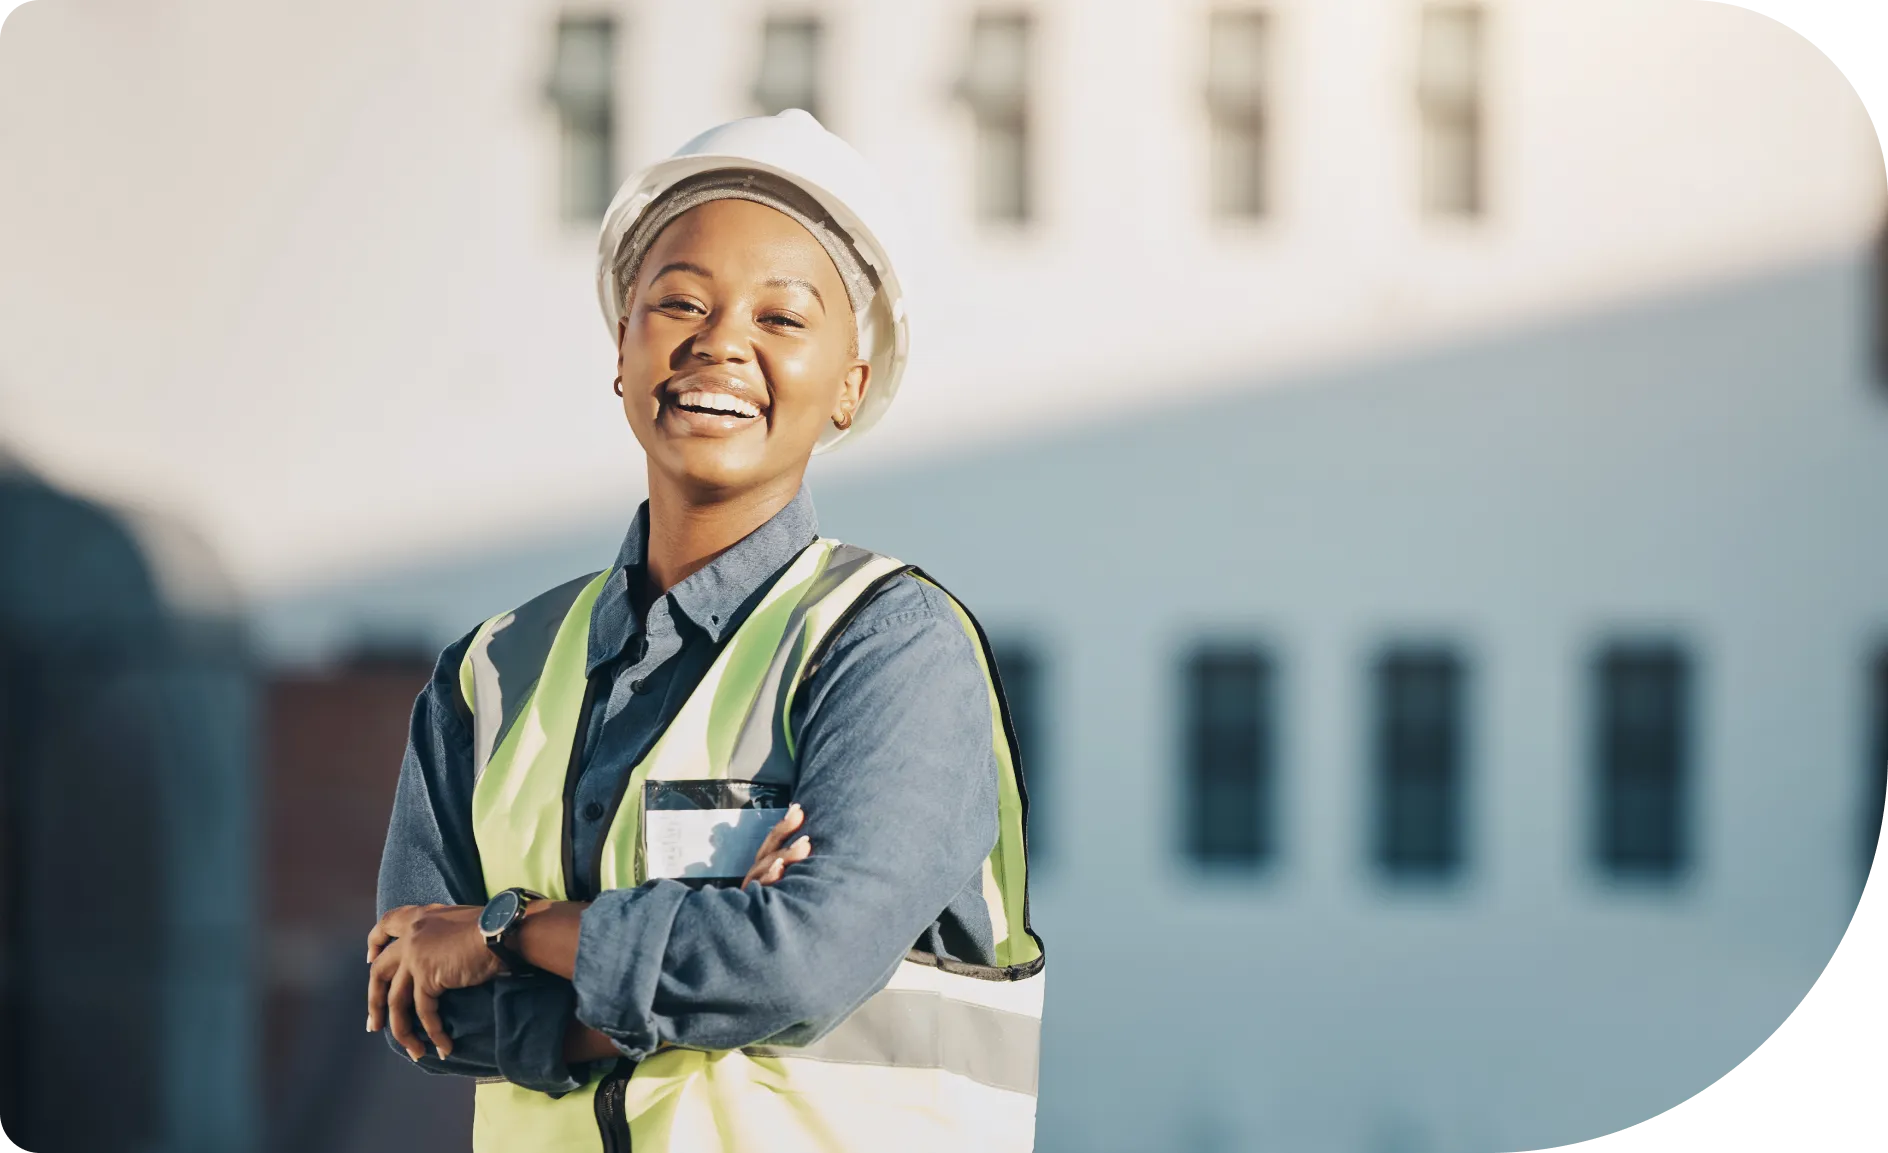 Happy, smiling professional lady wearing a construction hat and protective clothing